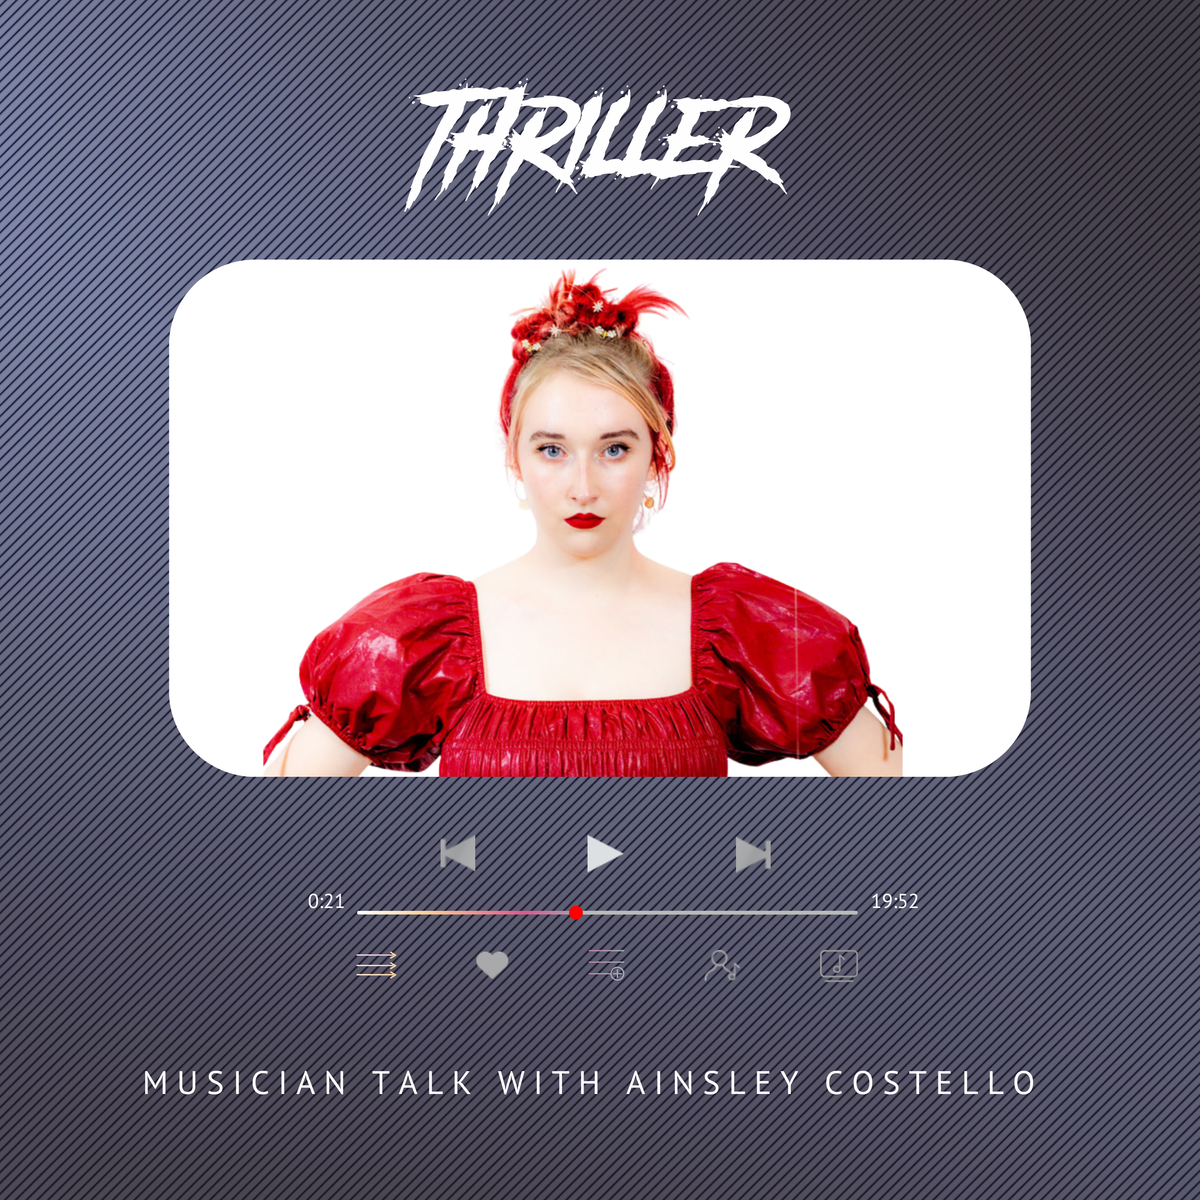 Musician talk with Ainsley Costello